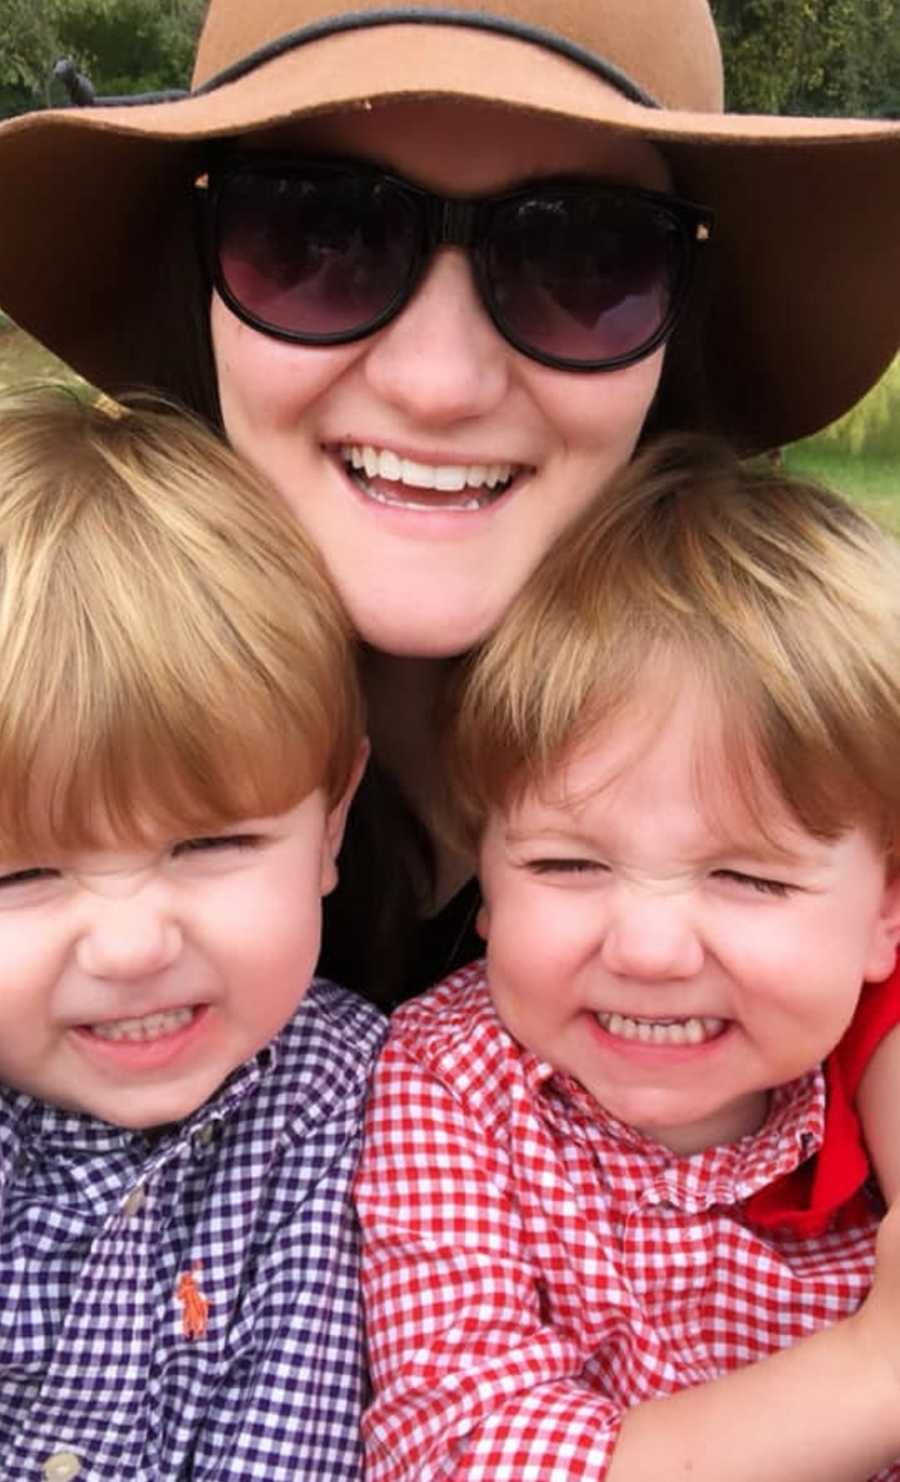 Mother smiles in selfie with young twin boys